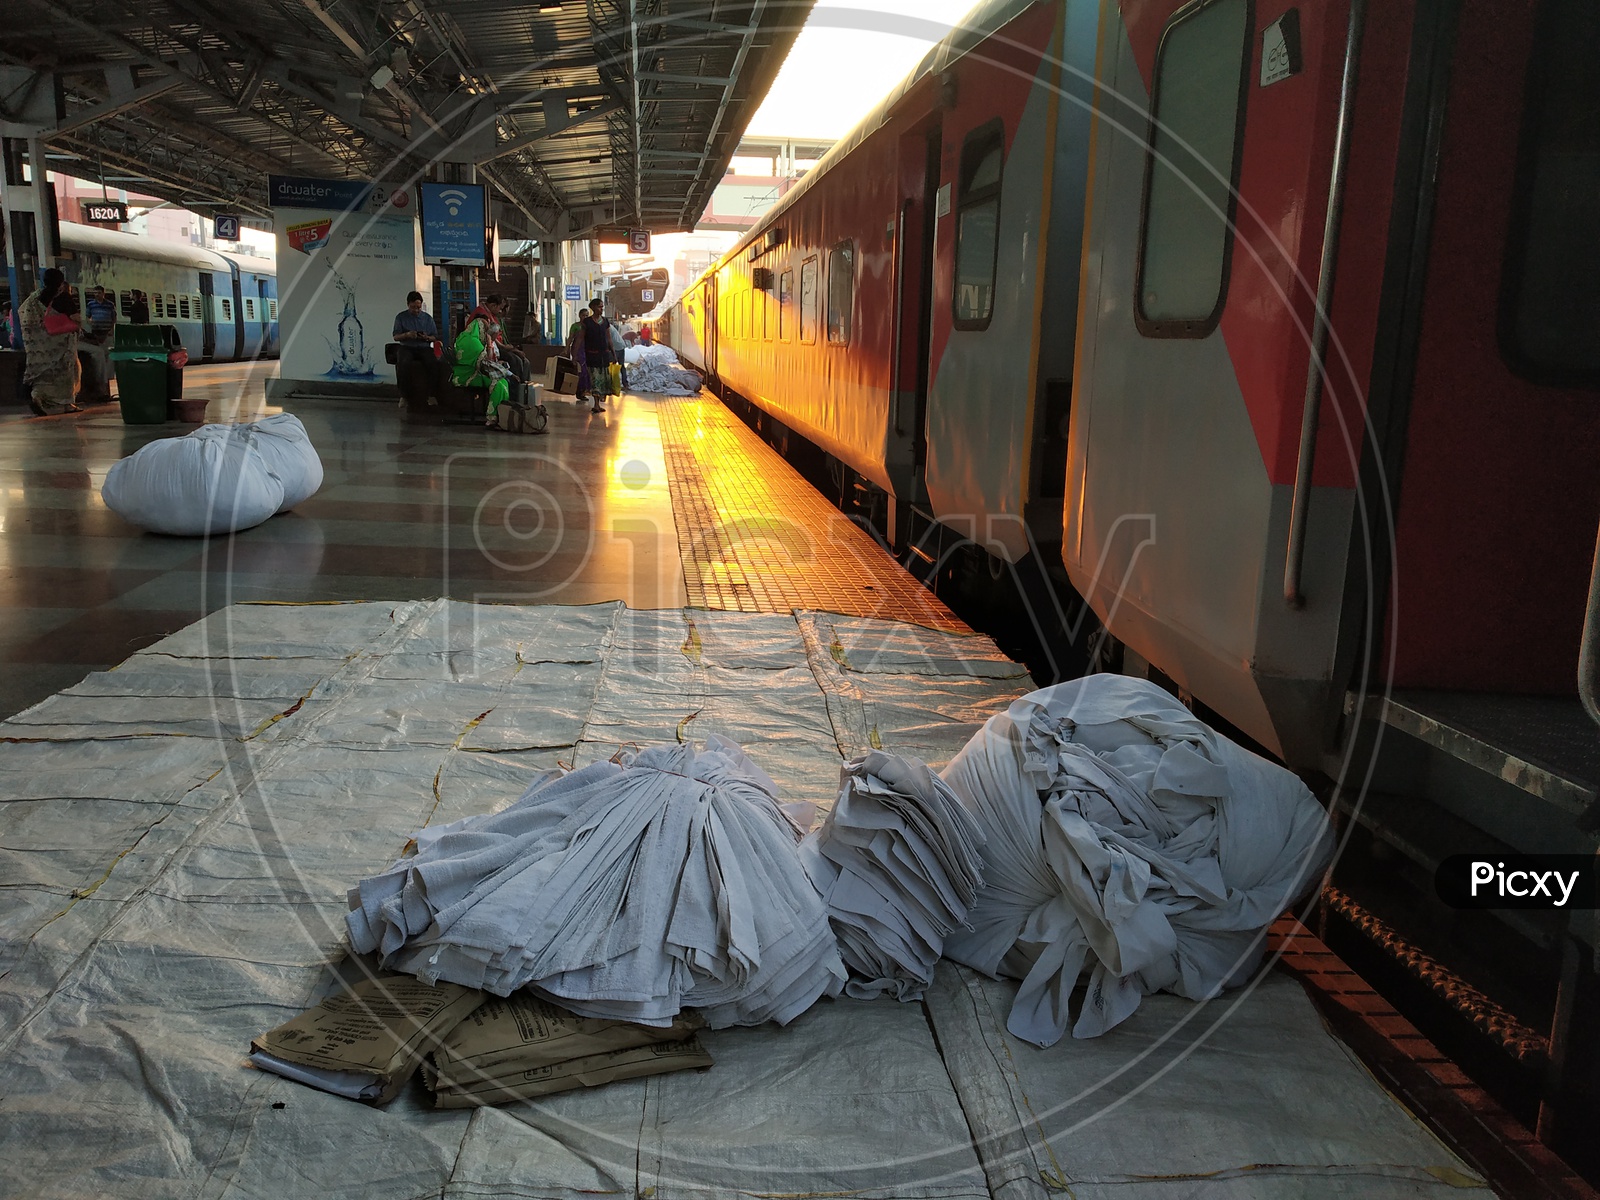 Hospitality Services In Indian Railways Collecting the Bed Sheets From Train